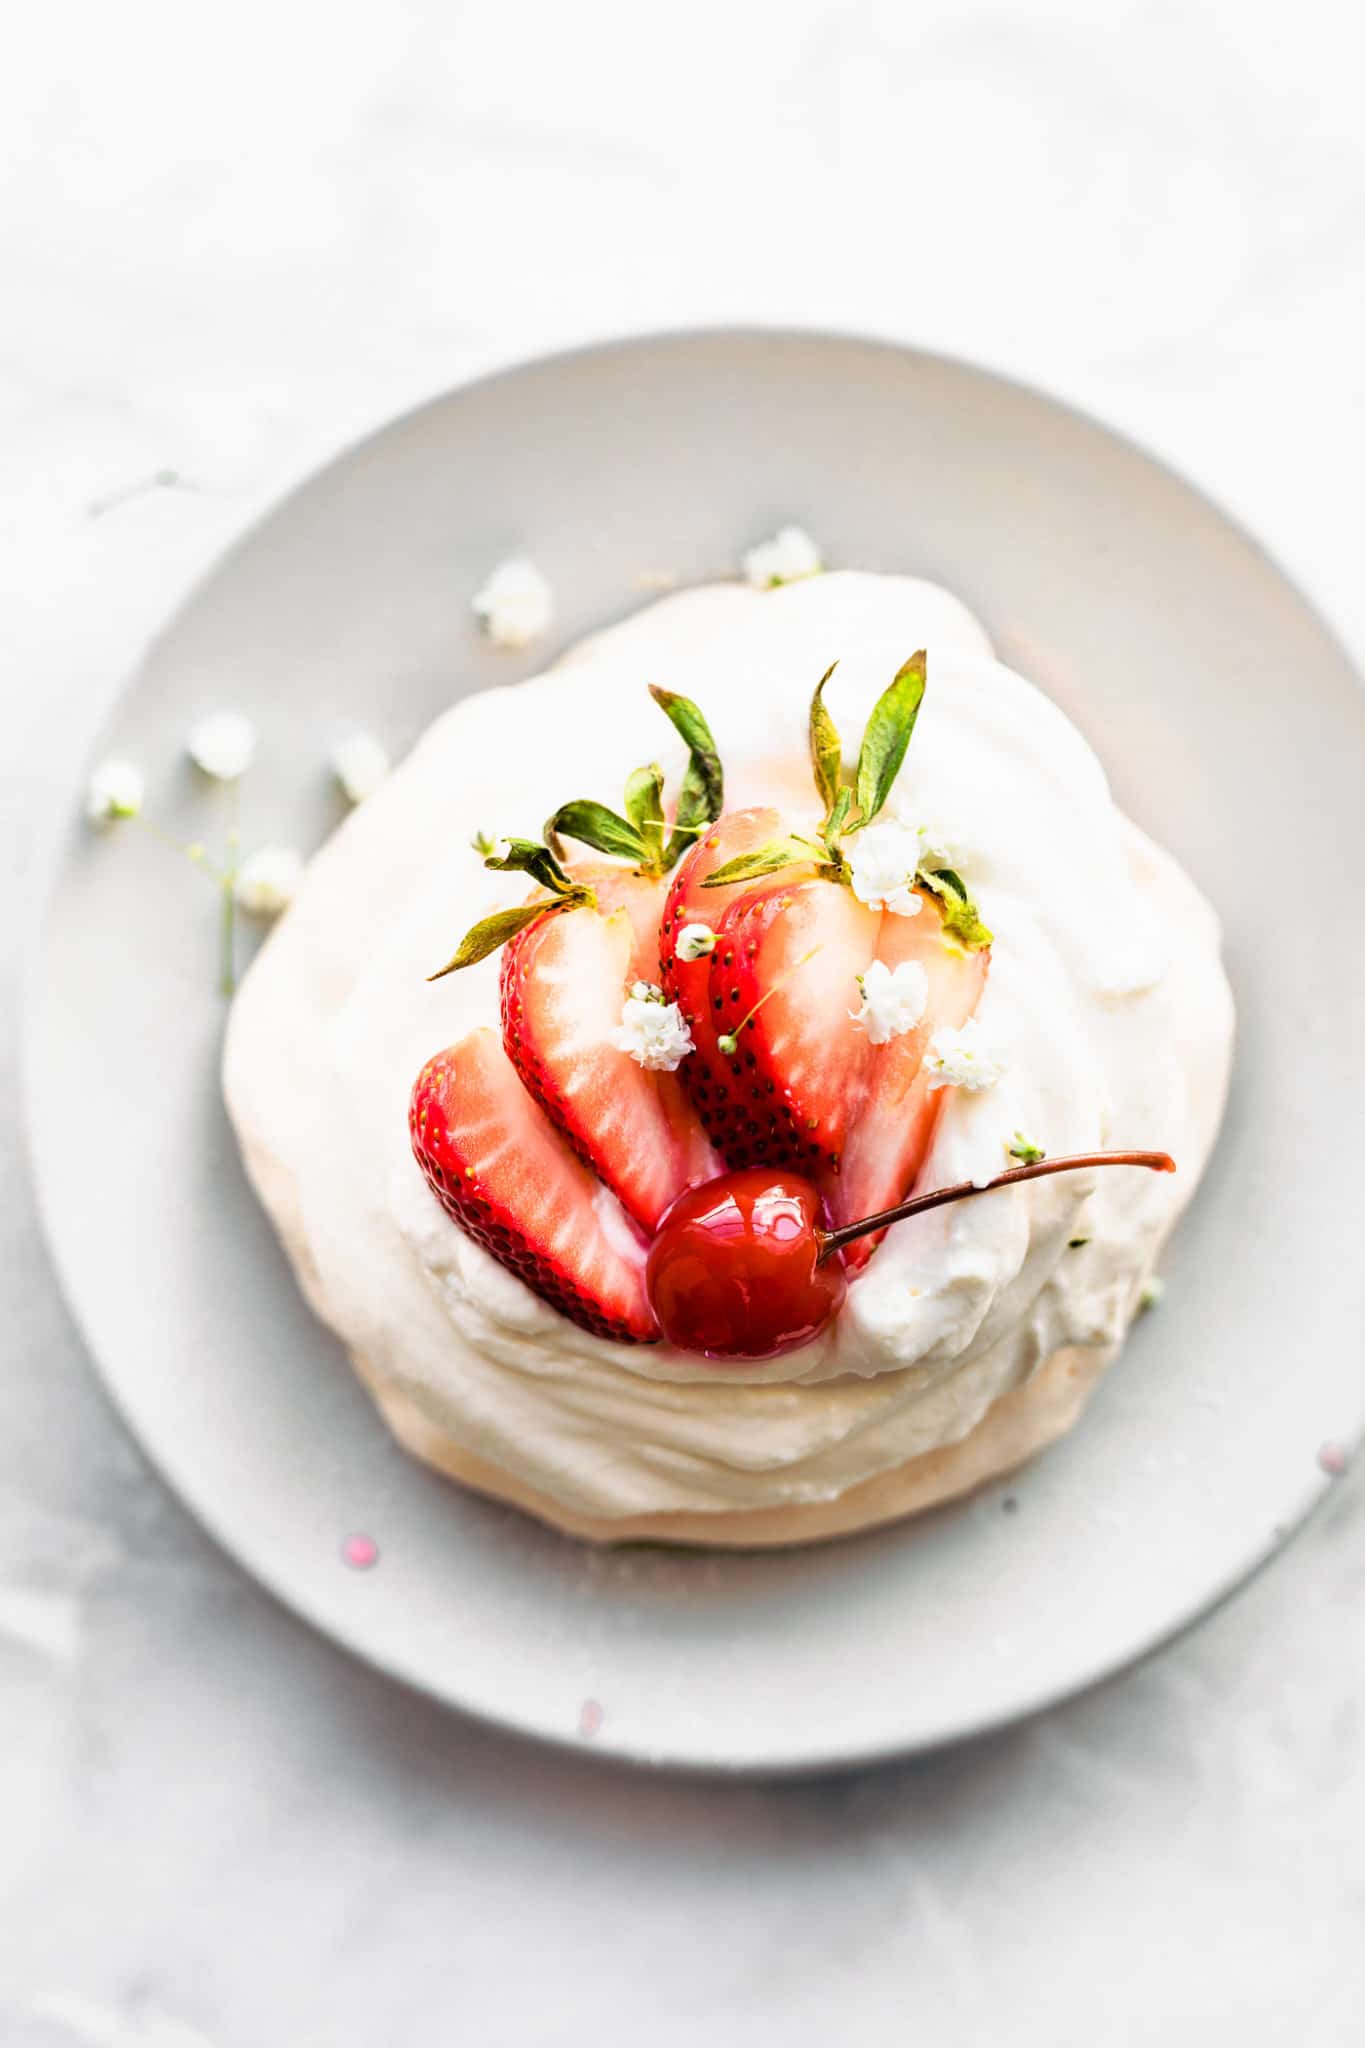 An overhead image of a pavlova on a white plate, topped with fresh strawberries and a cherry.